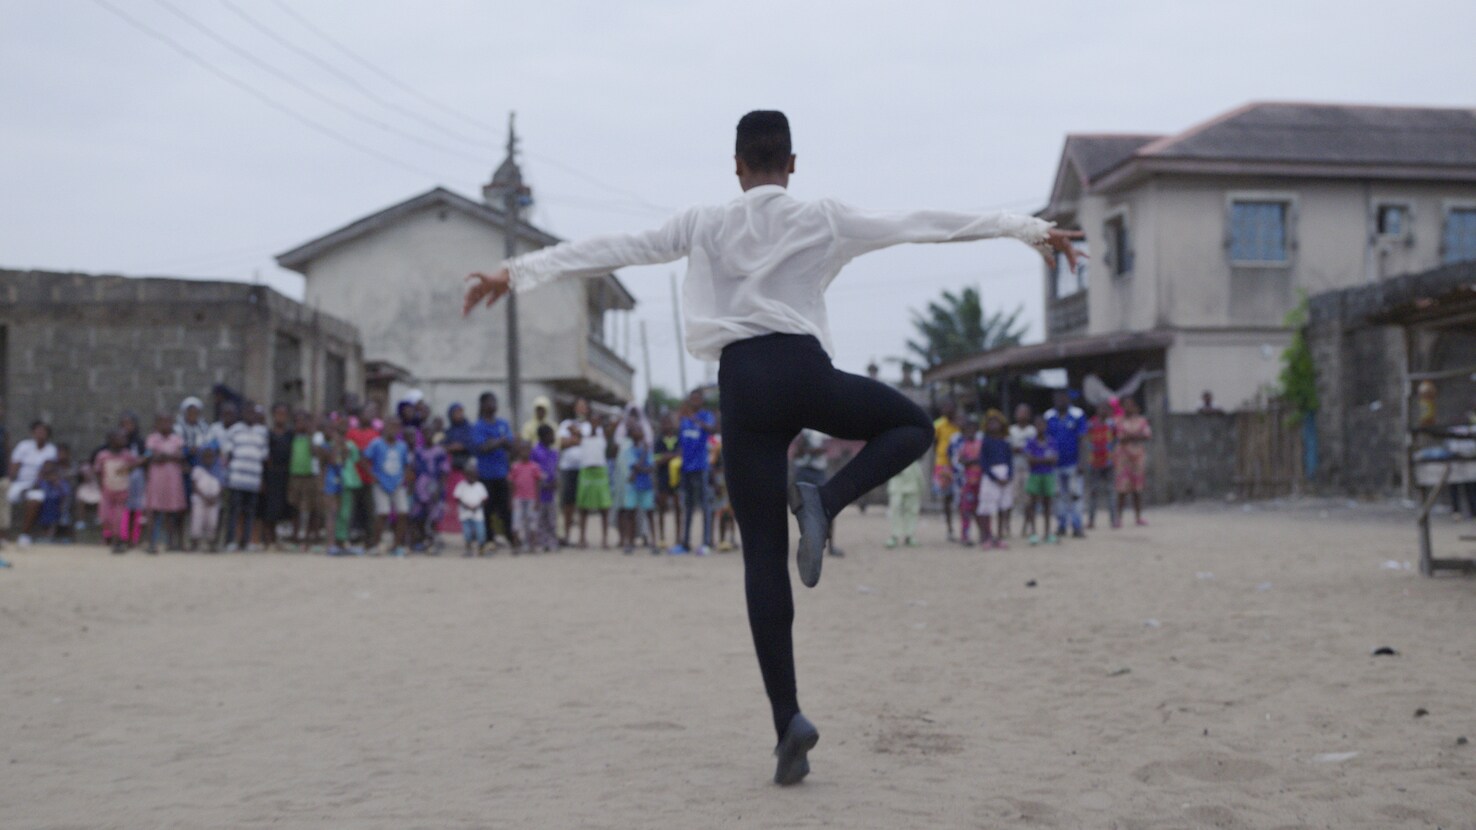 MADU - Anthony Madu dances in front of an audience during his summer break trip back to his home in the Ajangbadi suburb of Lagos, Nigeria. (Disney)